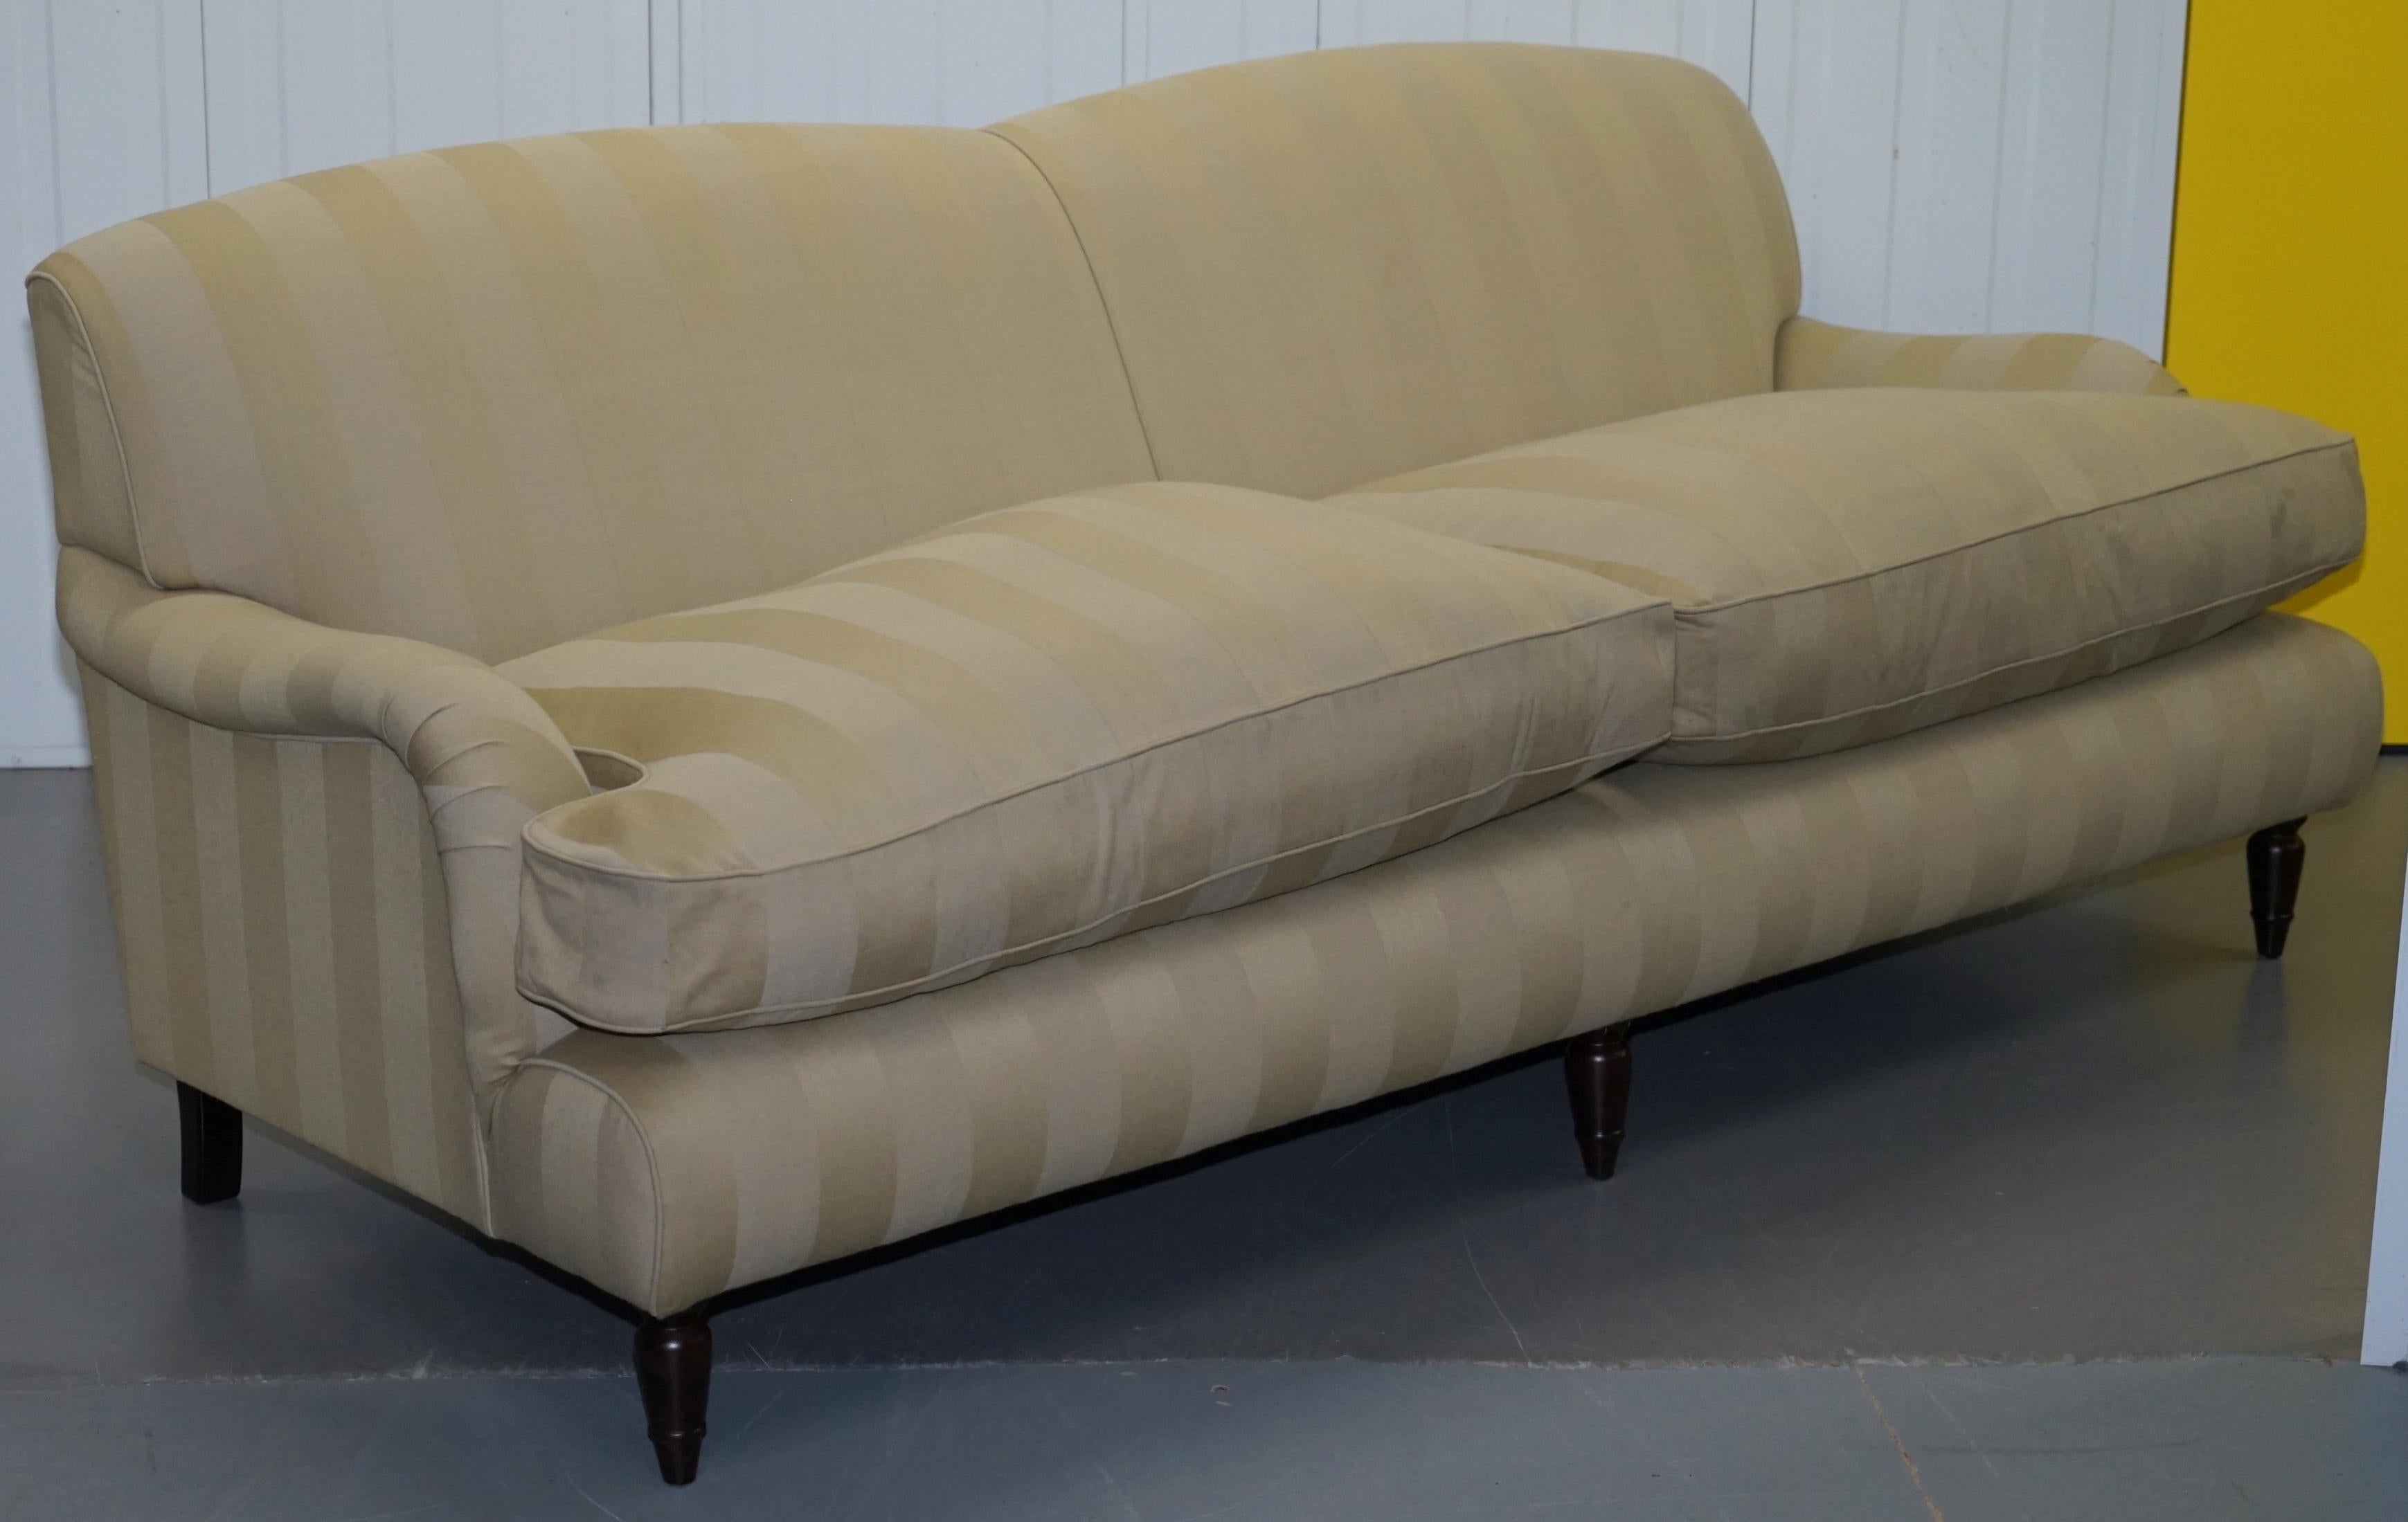 We are delighted to offer for sale this absolutely stunning Wesley-Barrell Howard model sofa and pair of armchairs suite RRp £18,000

A very luxury high end suite, the chairs retailed for £3699 frame alone and the sofa £6800 frame alone, with